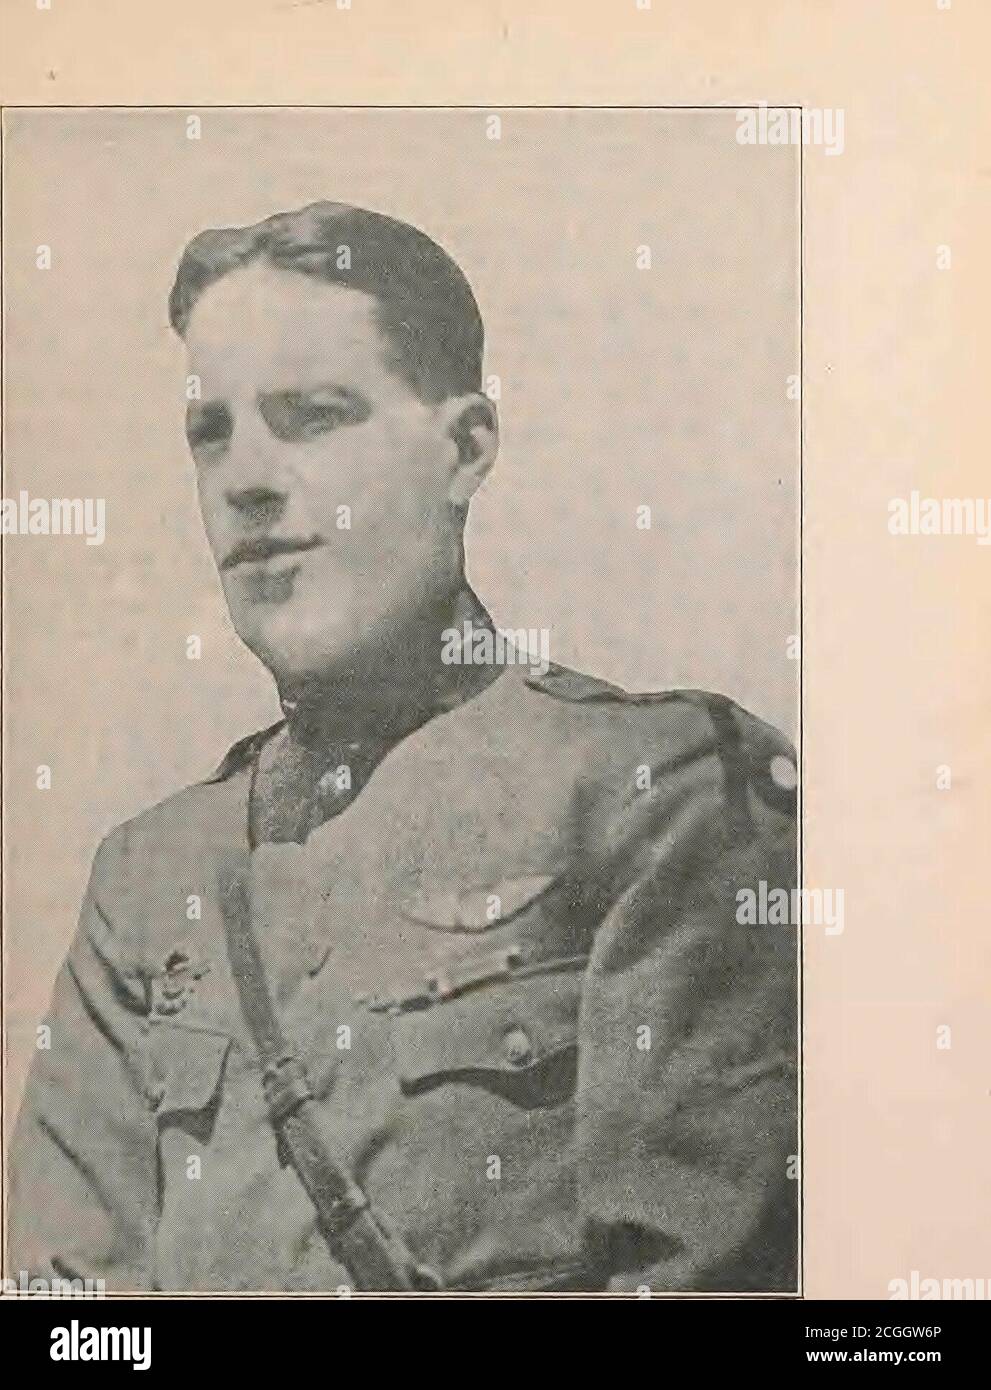 . New England aviators 1914-1918; their portraits and their records . ly 14, and onJuly 5 was attached to the 13th Aero Squadron, 2d Pursuit Group,with which he went to the front in the Toul sector. On Sept. 29, 1918, during the Argonne offensive, Lieut. Richardswas brought down, wounded in action, and was sent to the hospital.He reported for duty on Nov. 26, and served as Flight Commander,13th Squadron, from Dec. 18, 1918, to Jan. 4, 1919. He was hon-orably discharged on April 7, 1919, at St.-Aignan, France, and re-turned to the U.S. Inactive Status: Capt. in Reserve; per letterWar Dept., Jun Stock Photo